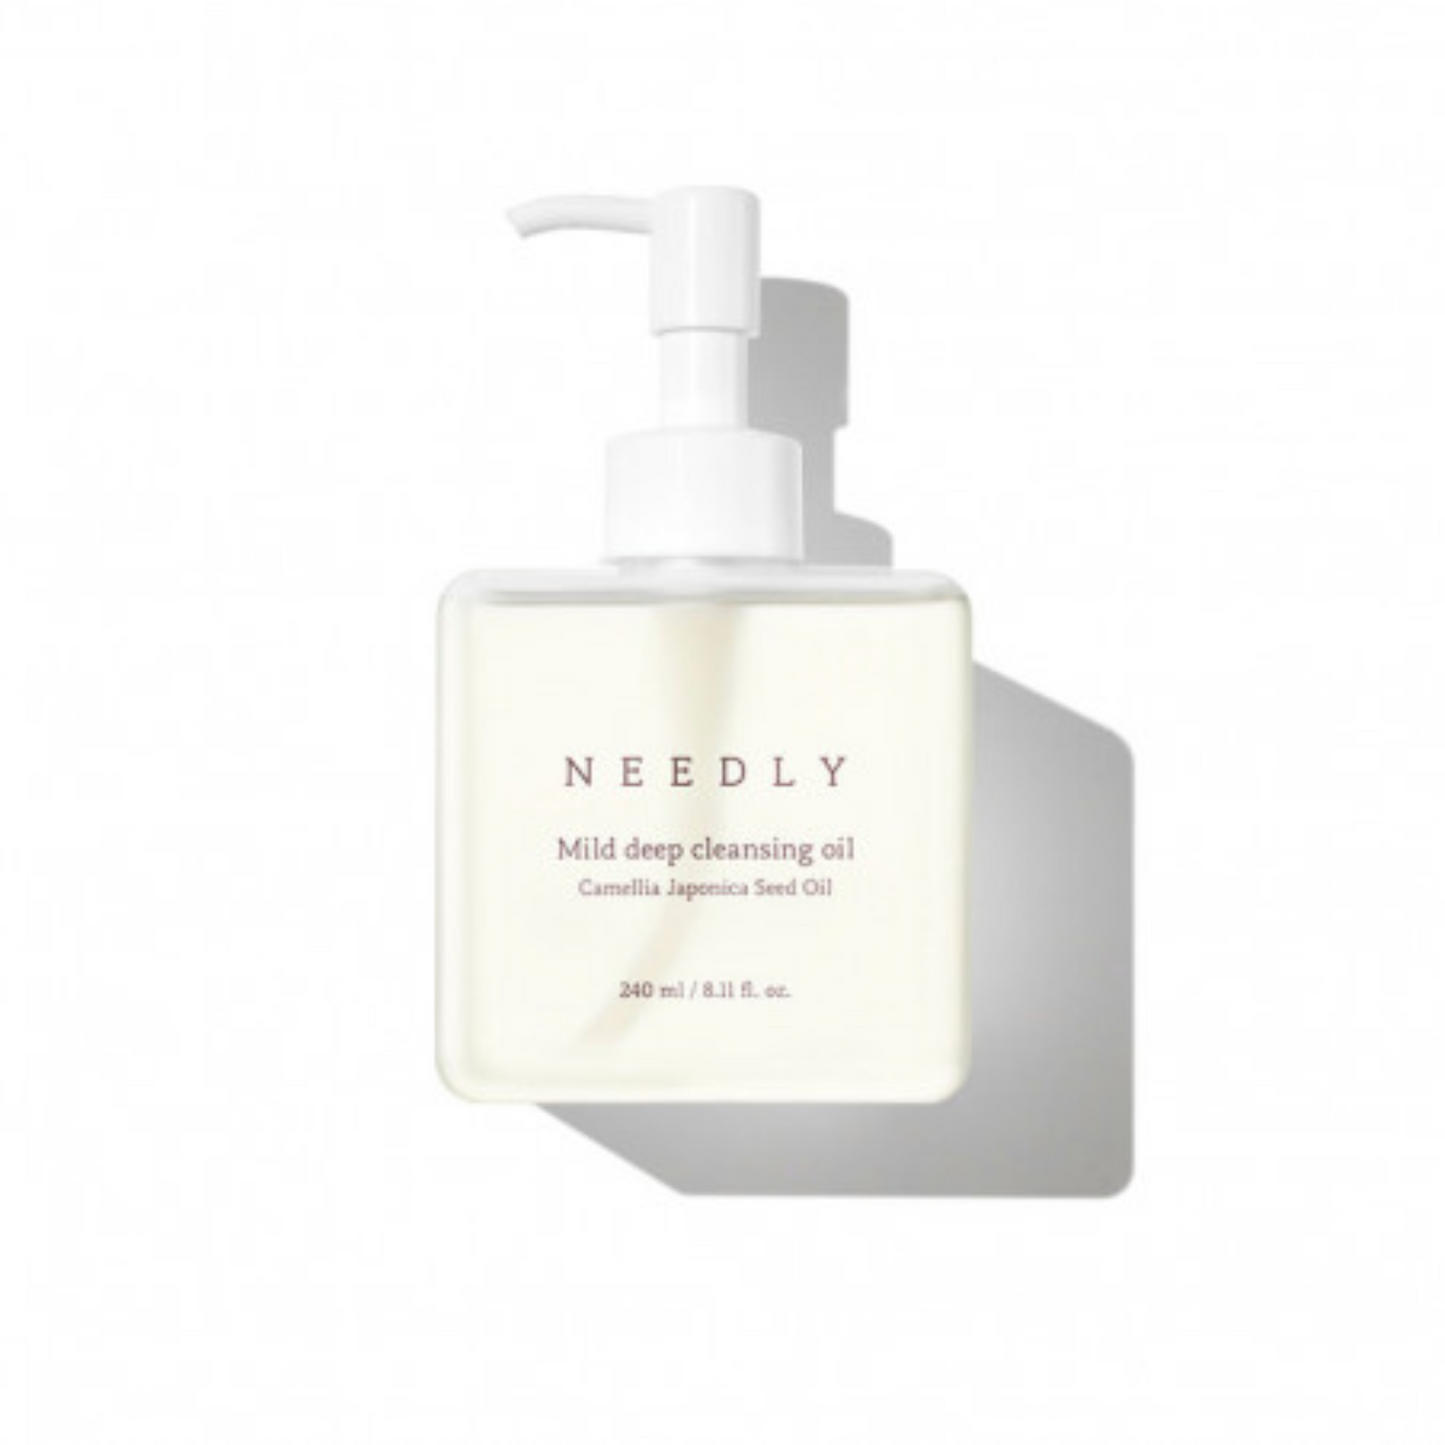 NEEDLY Mild Deep Cleansing Oil 240ml